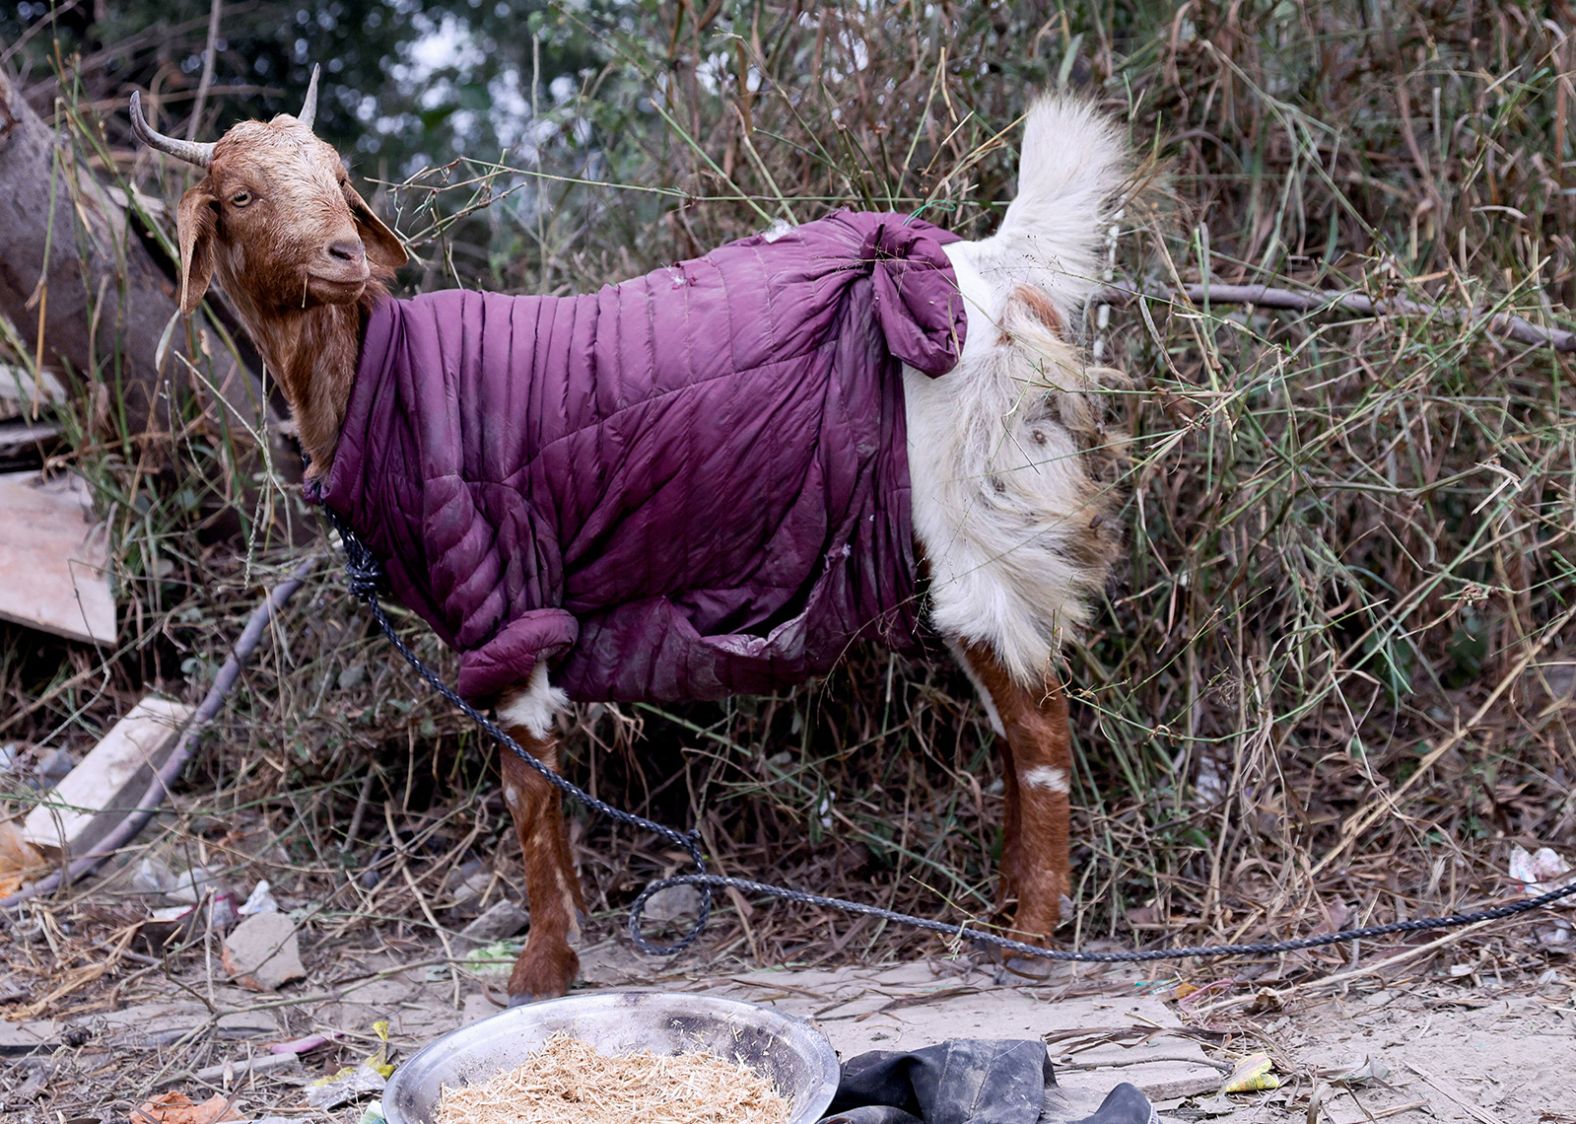 A goat wears a jacket on a cold morning in New Delhi on Tuesday, January 3.